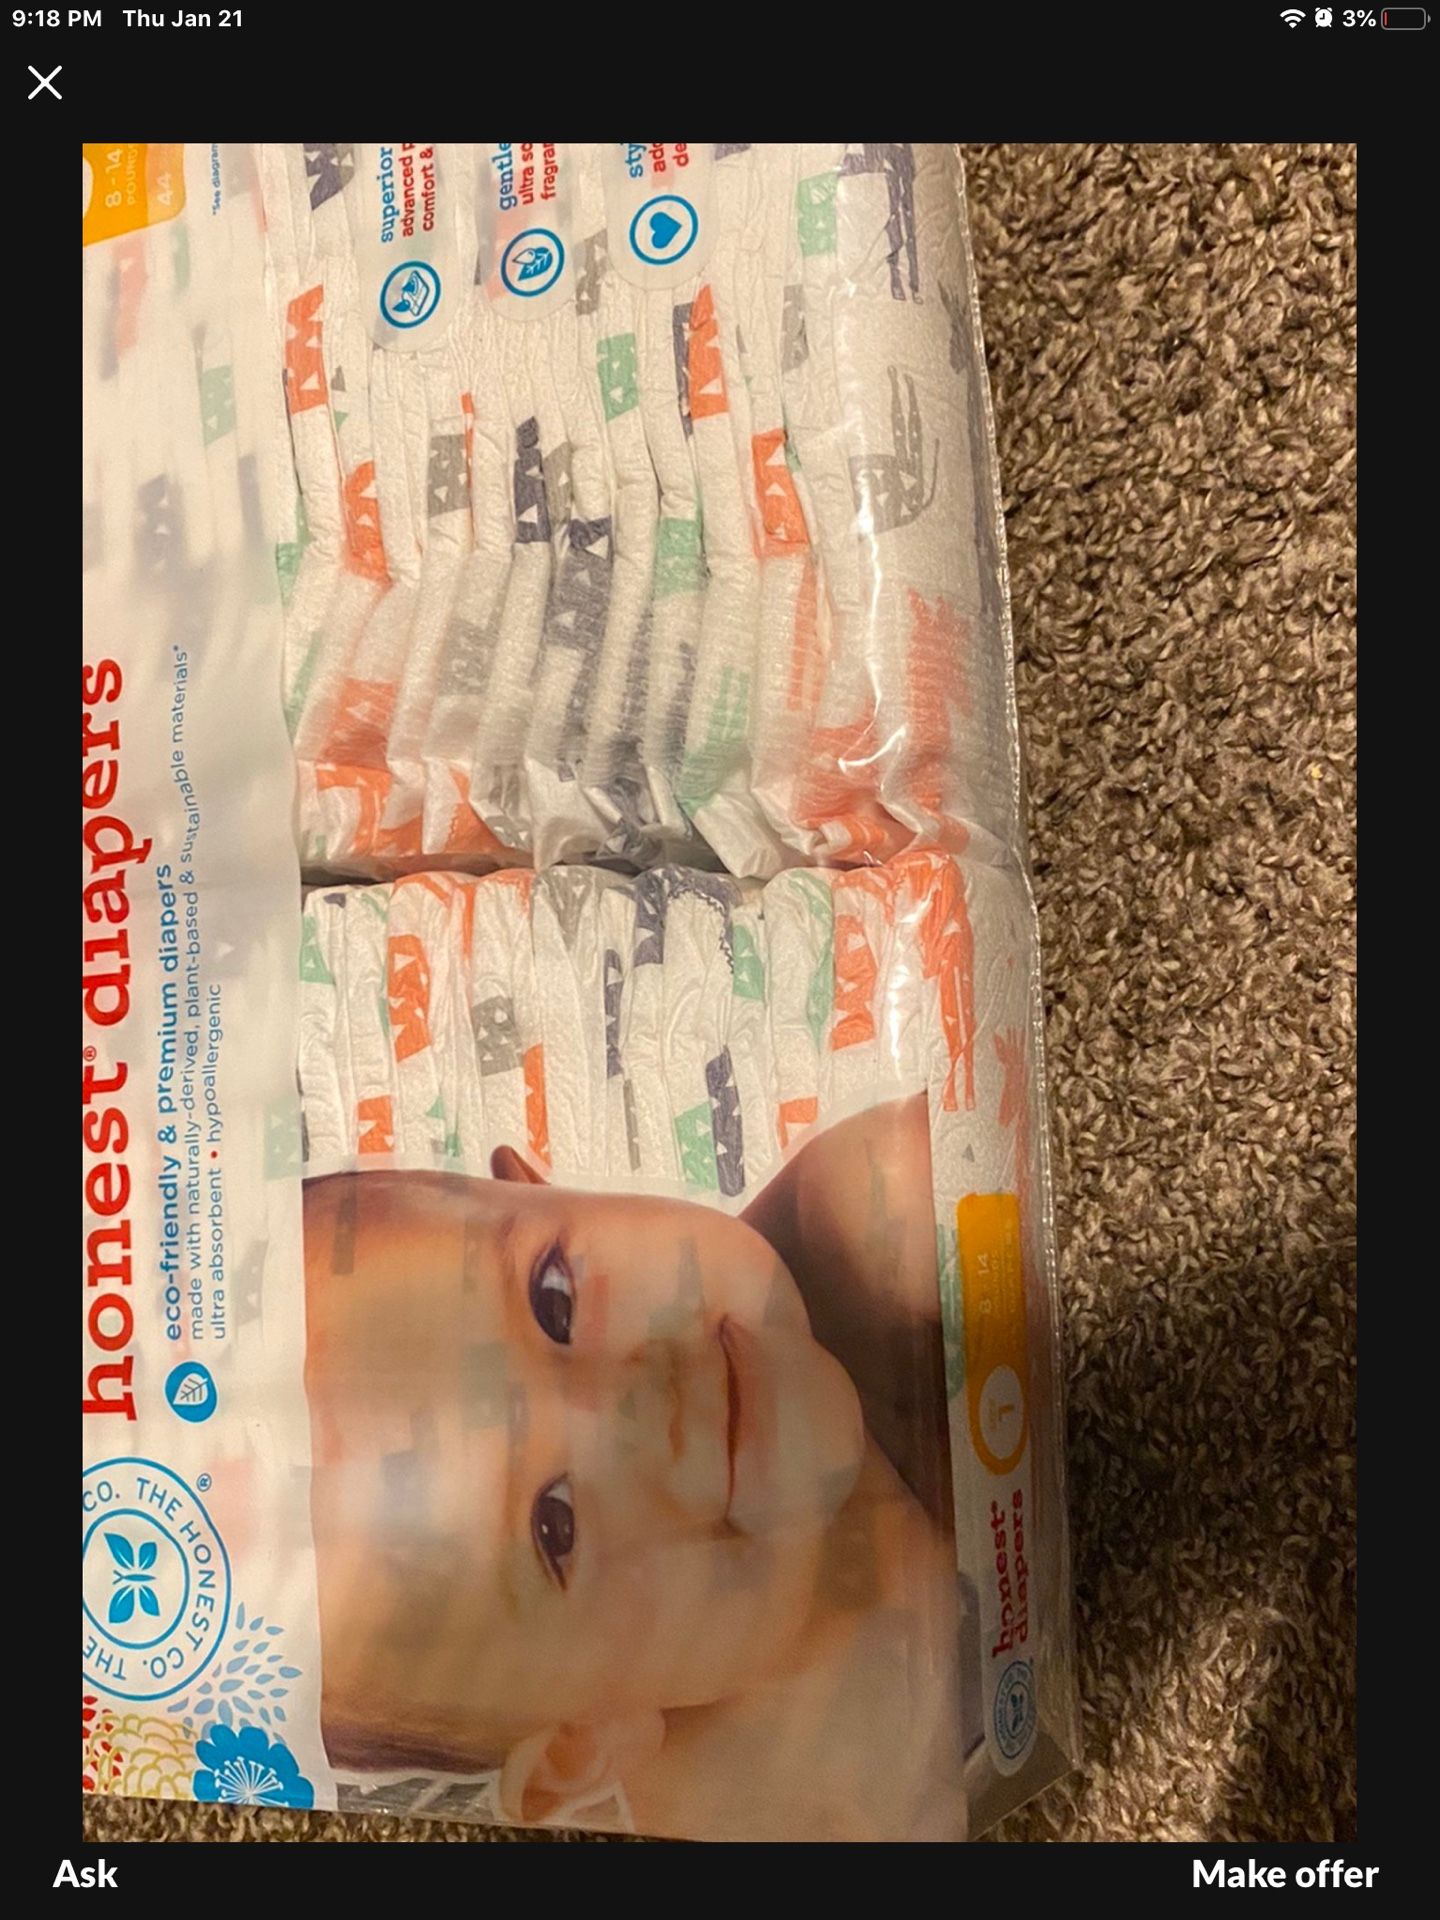 Size 1 Honest Diapers 9 Packs 44 Diapers Each Pack